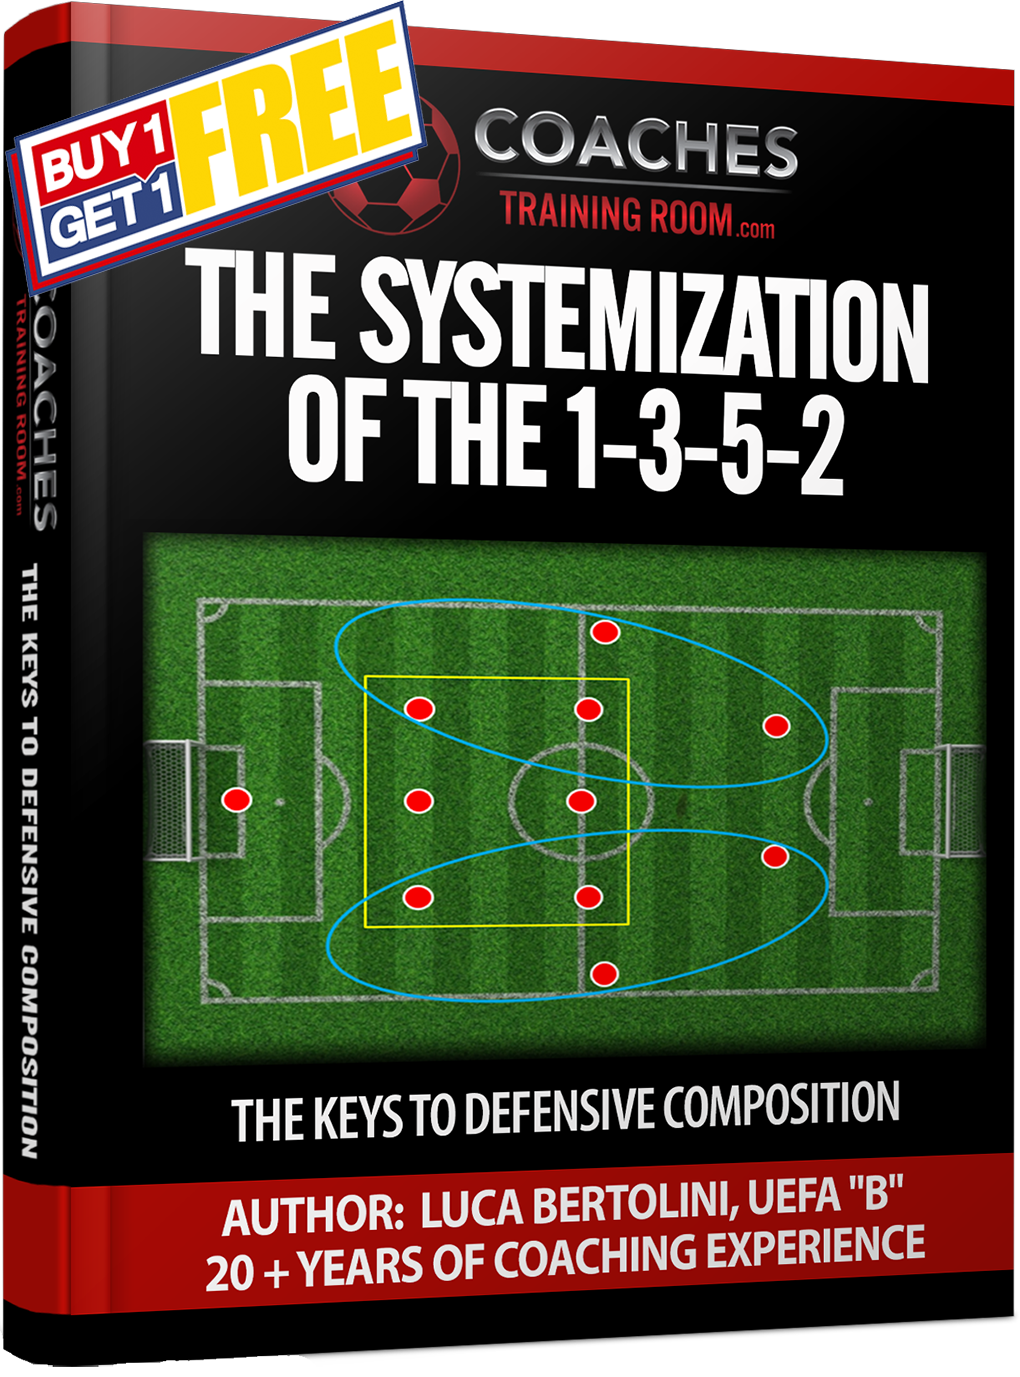 The Systemization of the 1-3-5-2 - The Keys to Defensive Composition by Luca Bertolini - Coaches Training Room